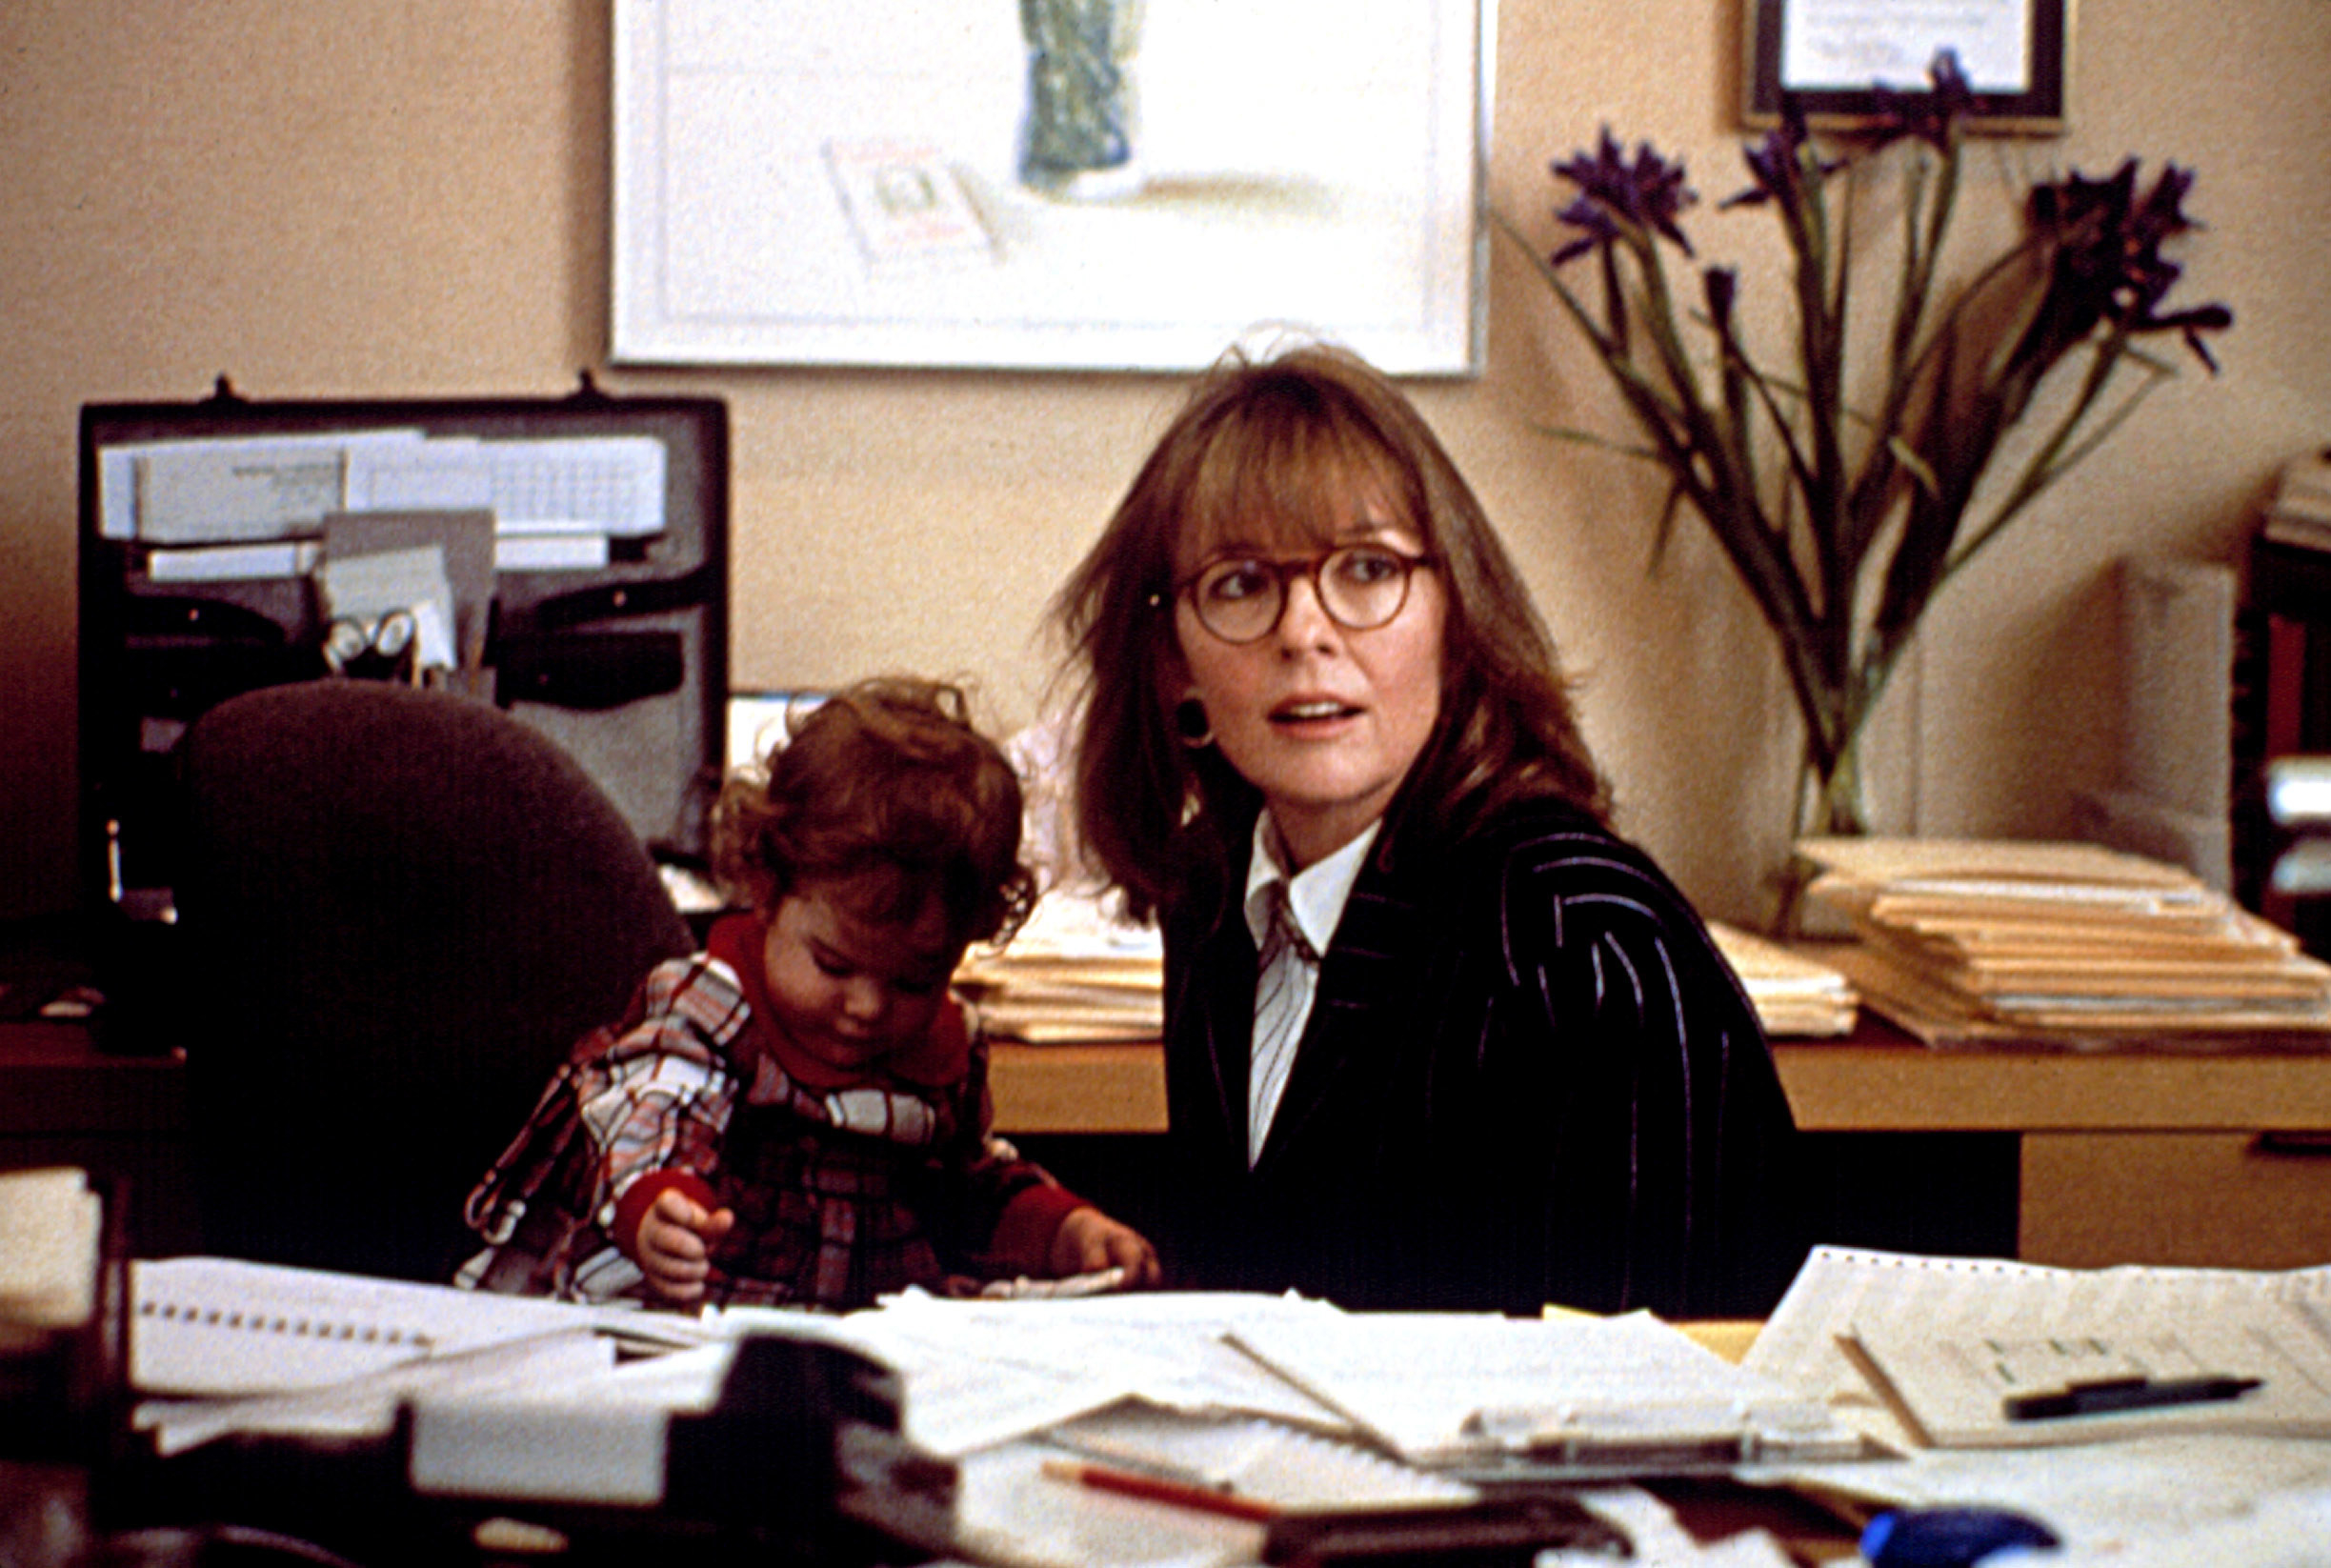 Diane Keaton sits at a desk covered in papers as J.C. while a baby sits in a chair next to her